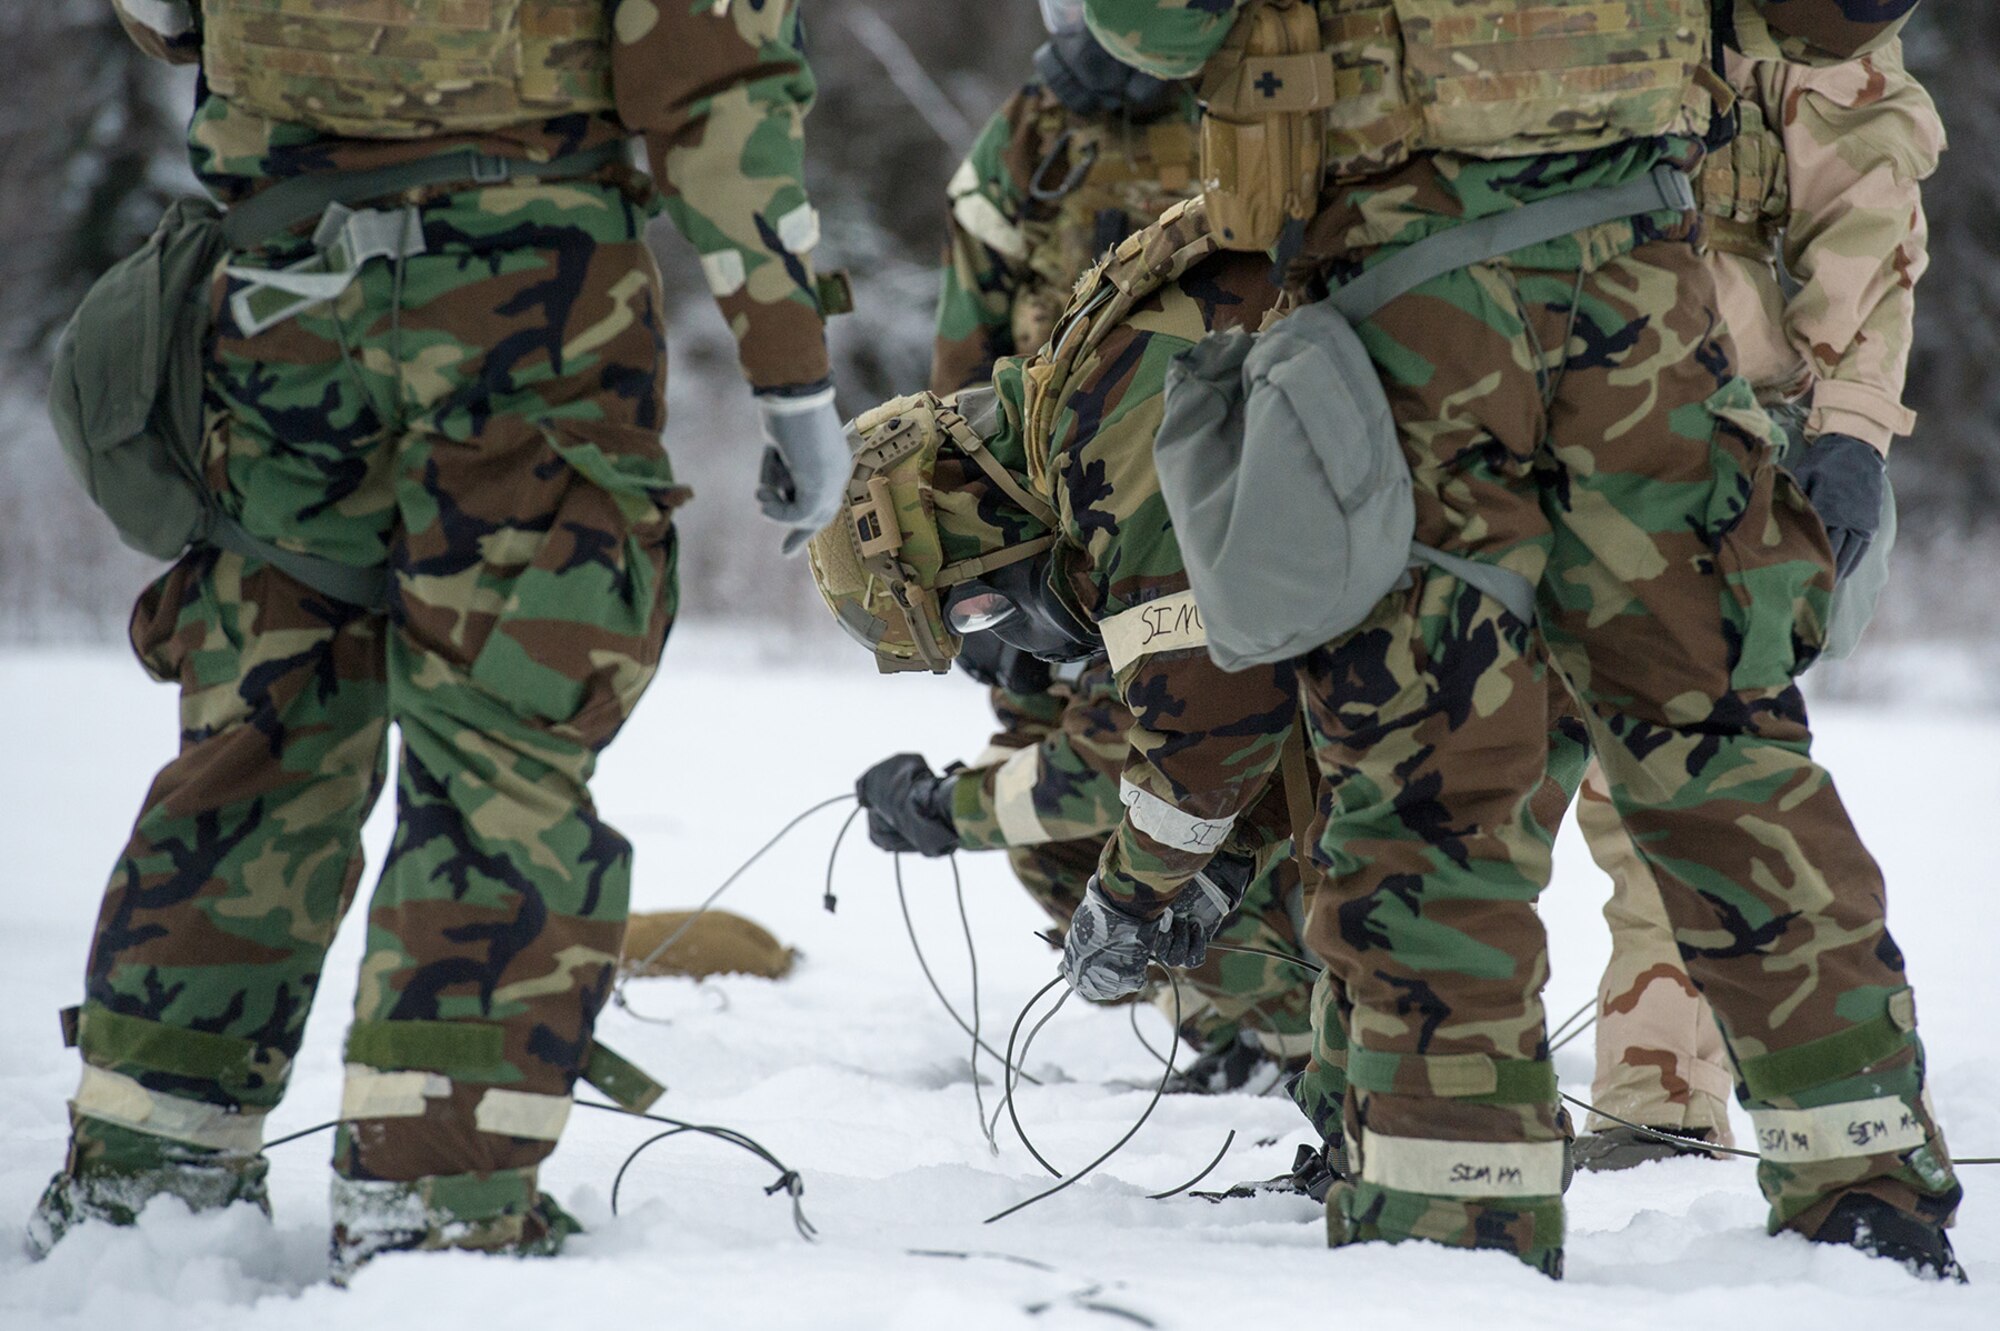 Airmen assigned to the 673d Civil Engineer Squadron, Explosives Ordinance Disposal Flight, prepare detonation cord and charges for a live-fire demolitions exercise in Mission Oriented Protective Posture 4 on Joint Base Elmendorf-Richardson, Alaska, Feb.14, 2018.  The Airmen were conducting EOD training in a simulated chemical weapons contaminated environment.